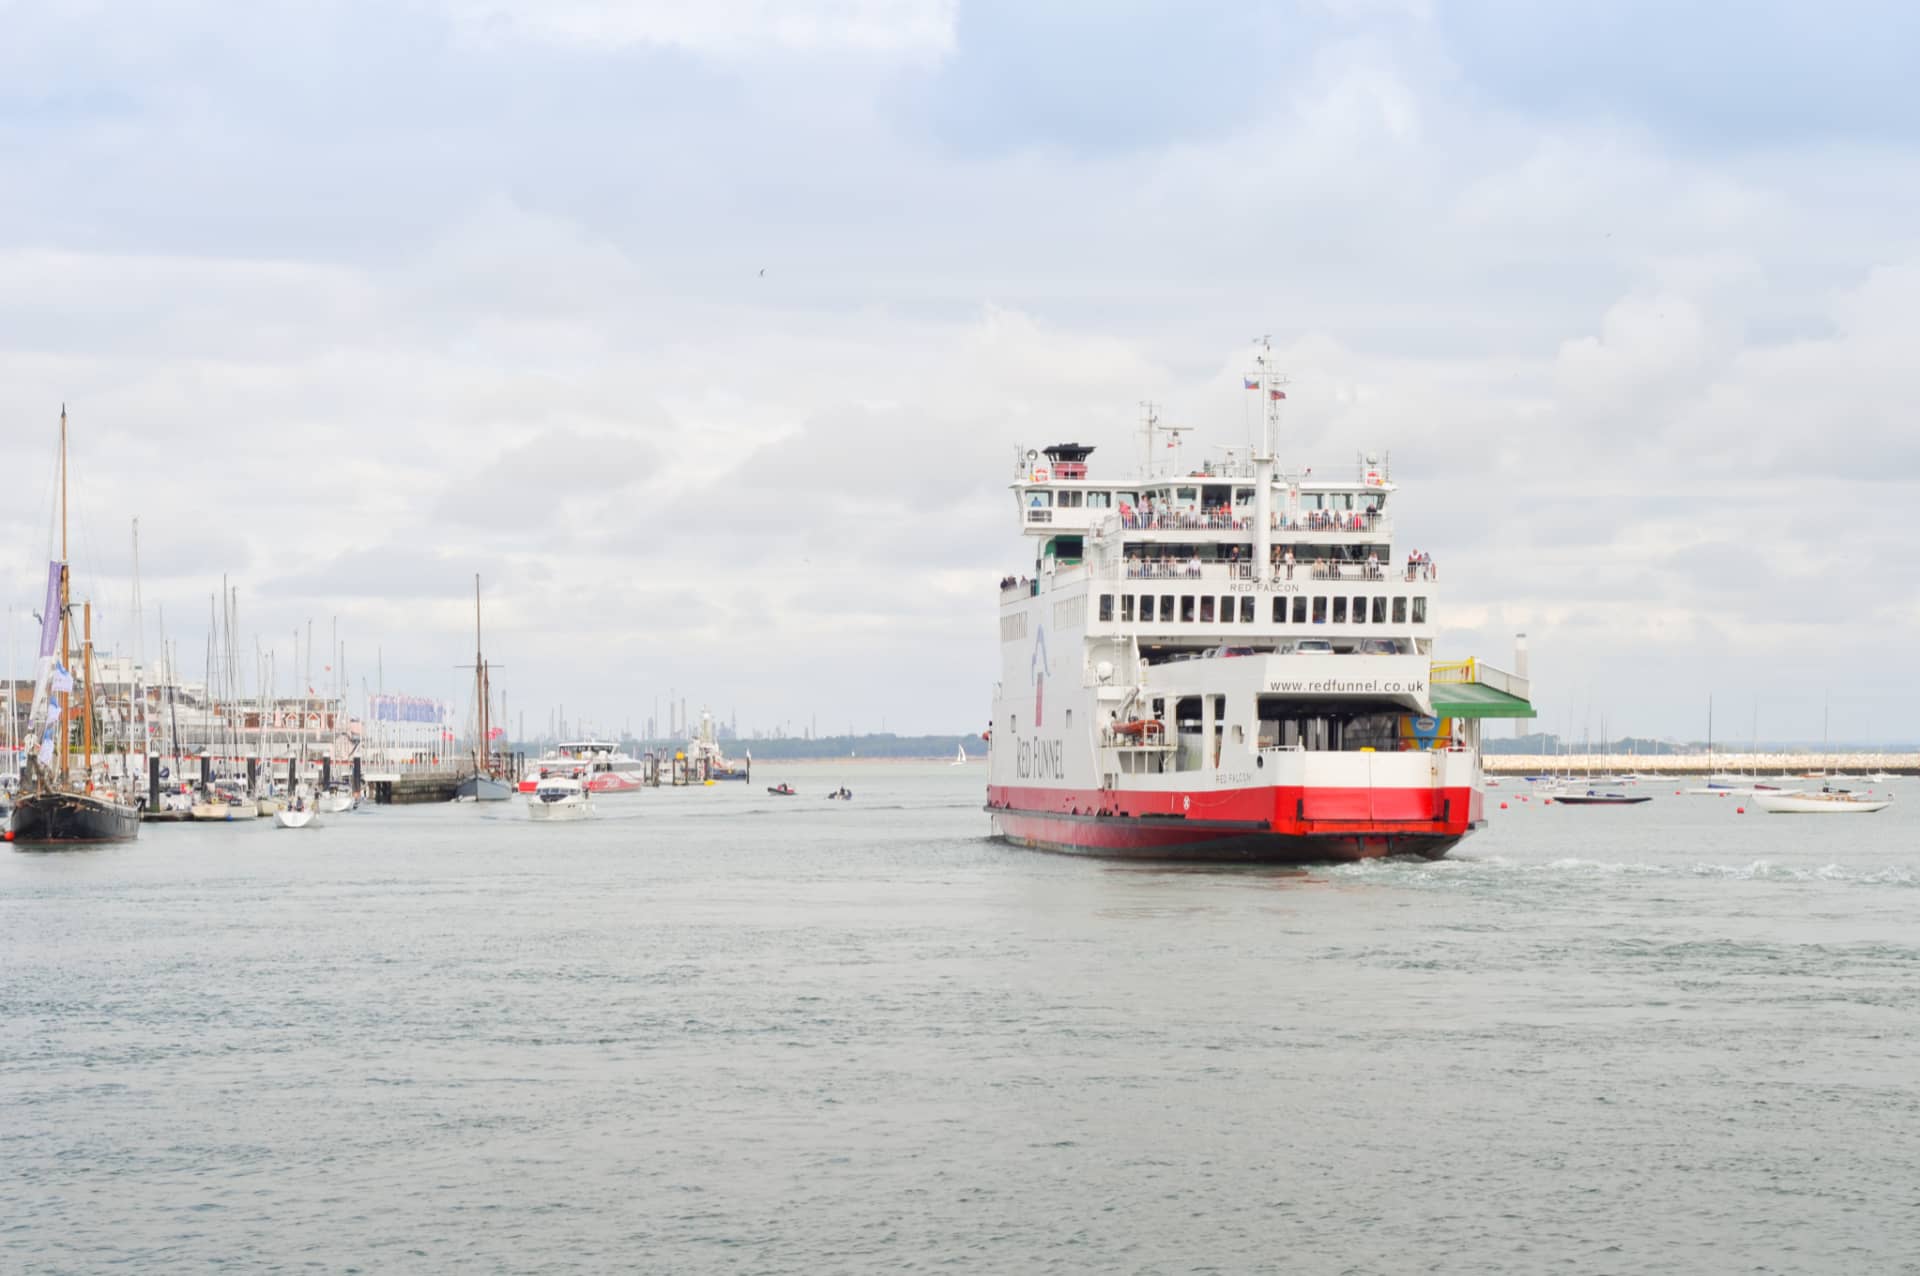 Funnel launch Island Travel Offer for ferry travel until the end 2022